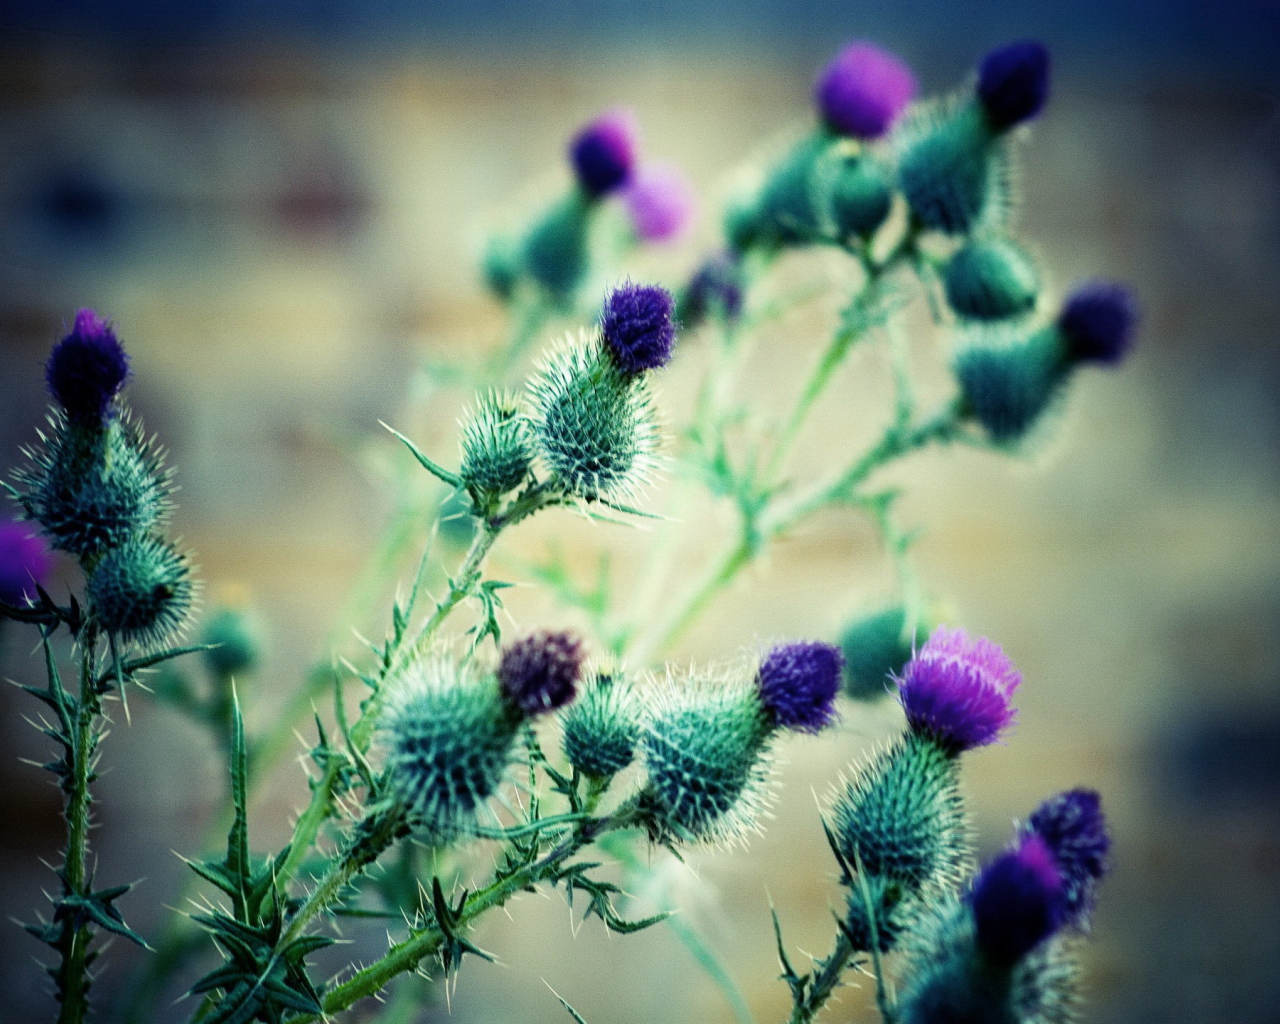 The flowers of thistles